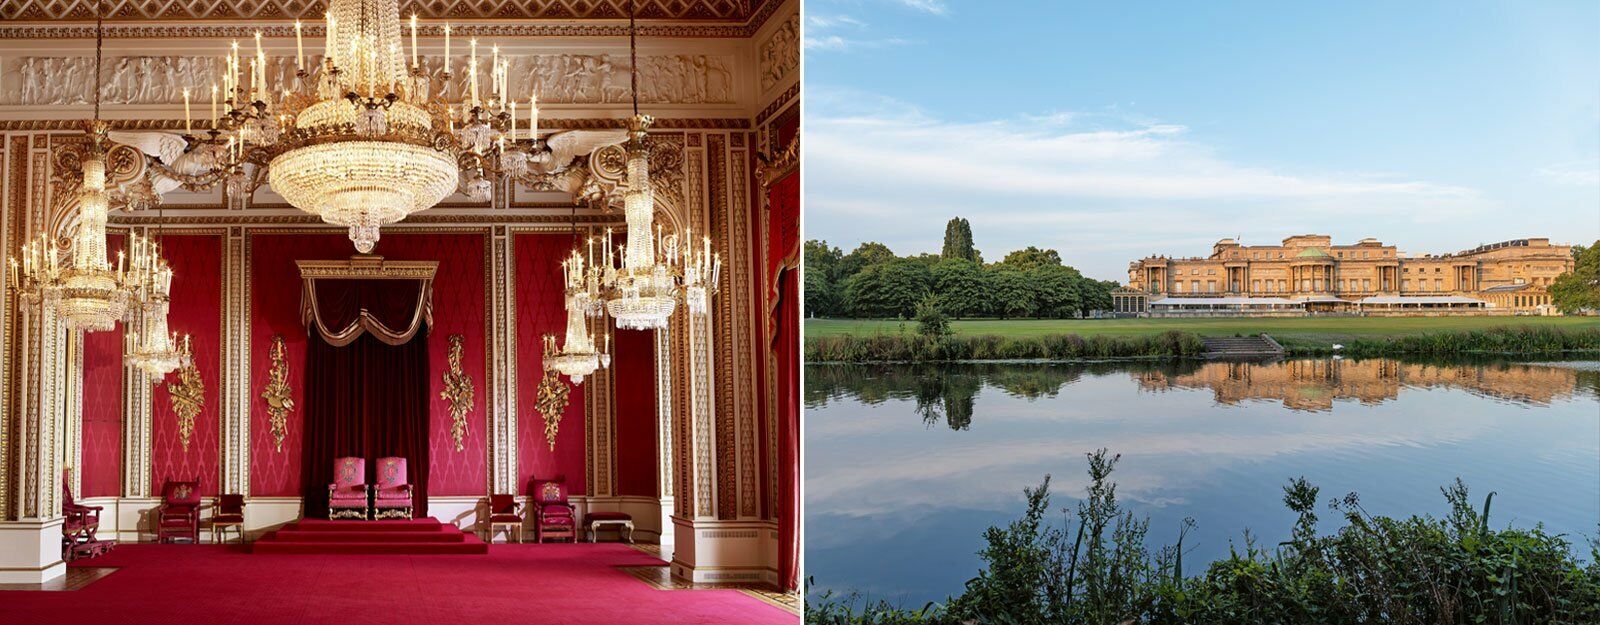 The State Rooms and Gardens at Buckingham Palace tickets Saturday 11th September